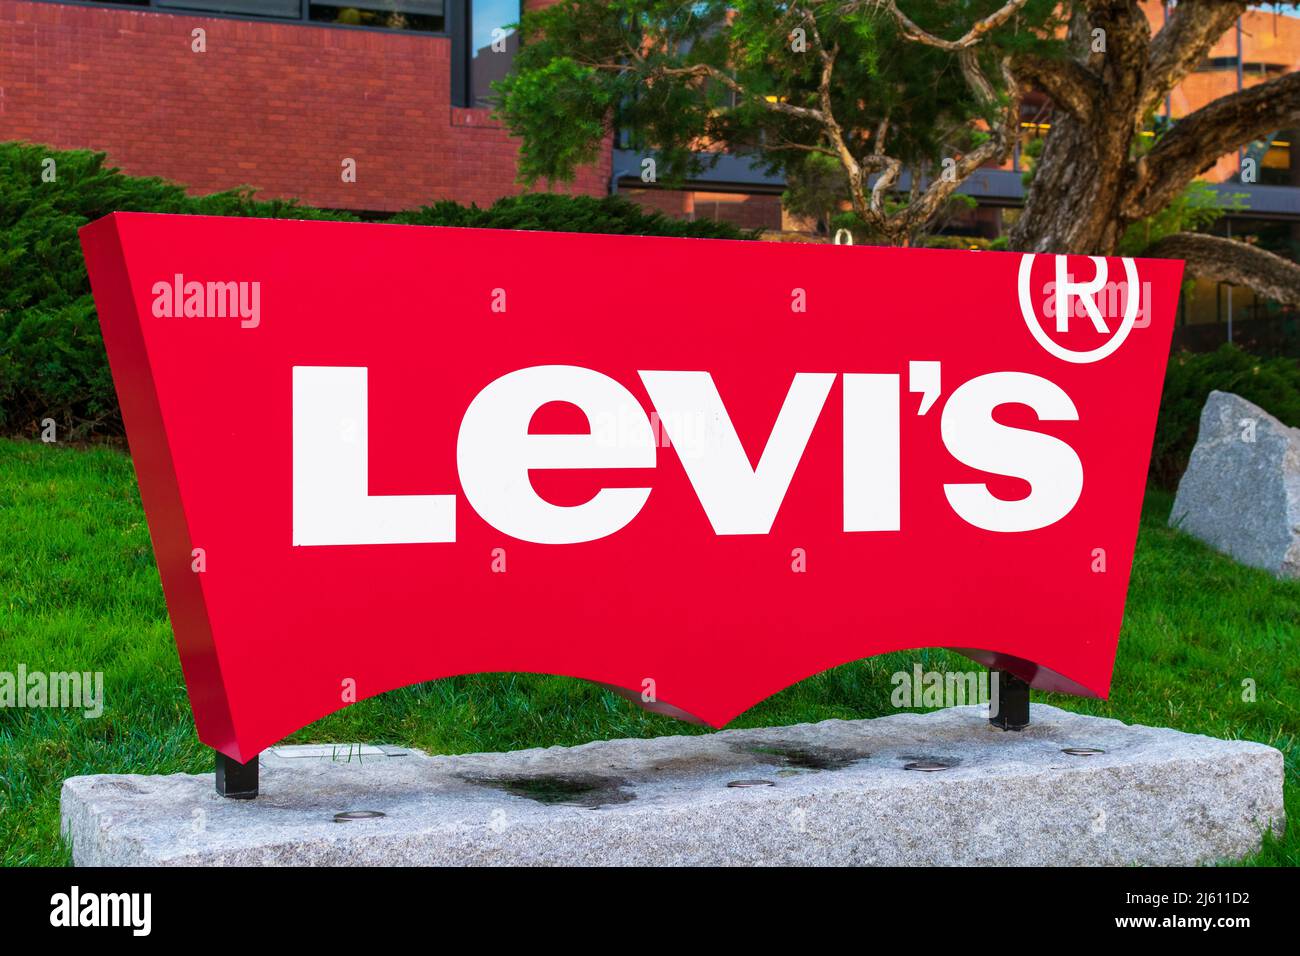 Levis red logo at headquarters of Levi Strauss and Co located at Levi Strauss Plaza. Levi Strauss Co. is an American clothing company - San Francisco, Stock Photo